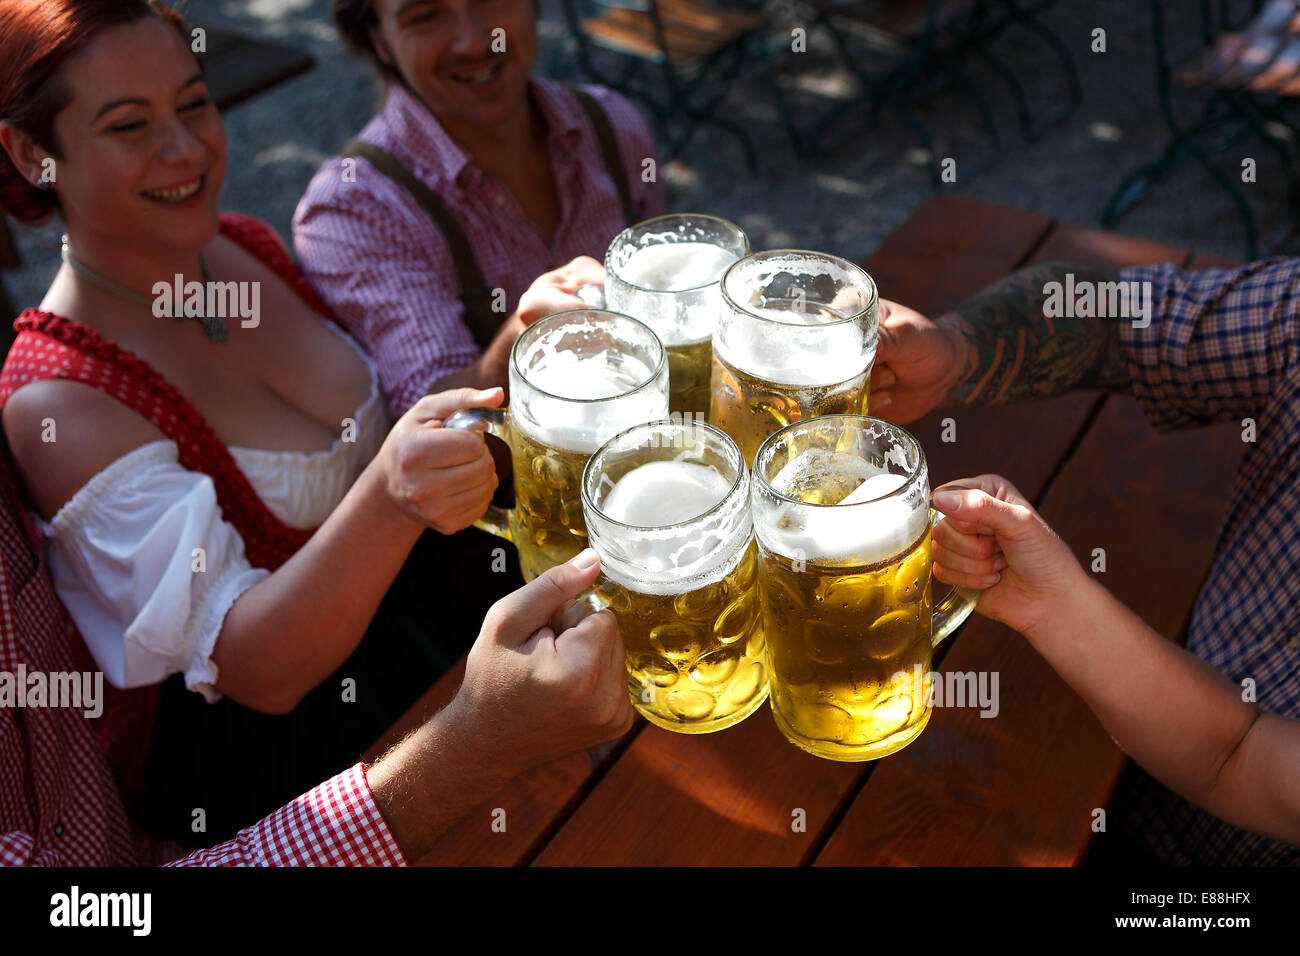 People in traditional costumes drinking beer in a Bavarian beer garden Stock Photo